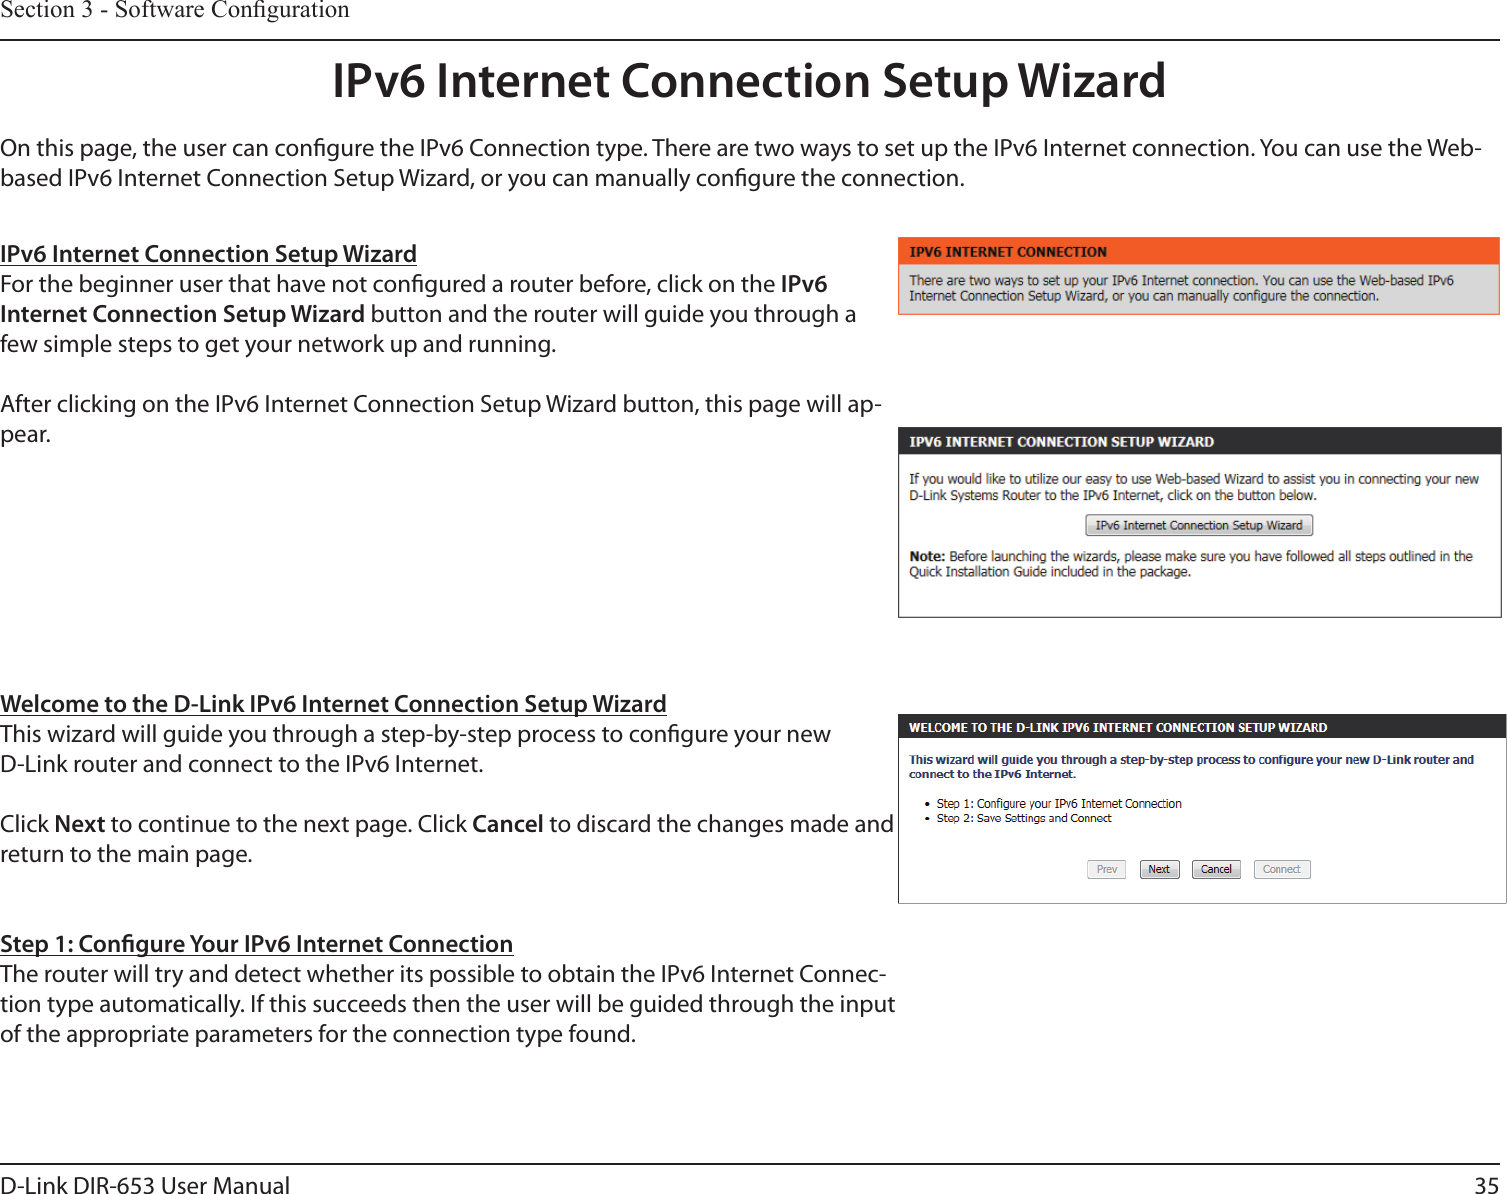 35D-Link DIR-653 User ManualSection 3 - Software CongurationIPv6 Internet Connection Setup WizardOn this page, the user can congure the IPv6 Connection type. There are two ways to set up the IPv6 Internet connection. You can use the Web-based IPv6 Internet Connection Setup Wizard, or you can manually congure the connection.IPv6 Internet Connection Setup WizardFor the beginner user that have not congured a router before, click on the IPv6 Internet Connection Setup Wizard button and the router will guide you through a few simple steps to get your network up and running. After clicking on the IPv6 Internet Connection Setup Wizard button, this page will ap-pear.Welcome to the D-Link IPv6 Internet Connection Setup WizardThis wizard will guide you through a step-by-step process to congure your new D-Link router and connect to the IPv6 Internet.Click Next to continue to the next page. Click Cancel to discard the changes made and return to the main page.Step 1: Congure Your IPv6 Internet ConnectionThe router will try and detect whether its possible to obtain the IPv6 Internet Connec-tion type automatically. If this succeeds then the user will be guided through the input of the appropriate parameters for the connection type found.